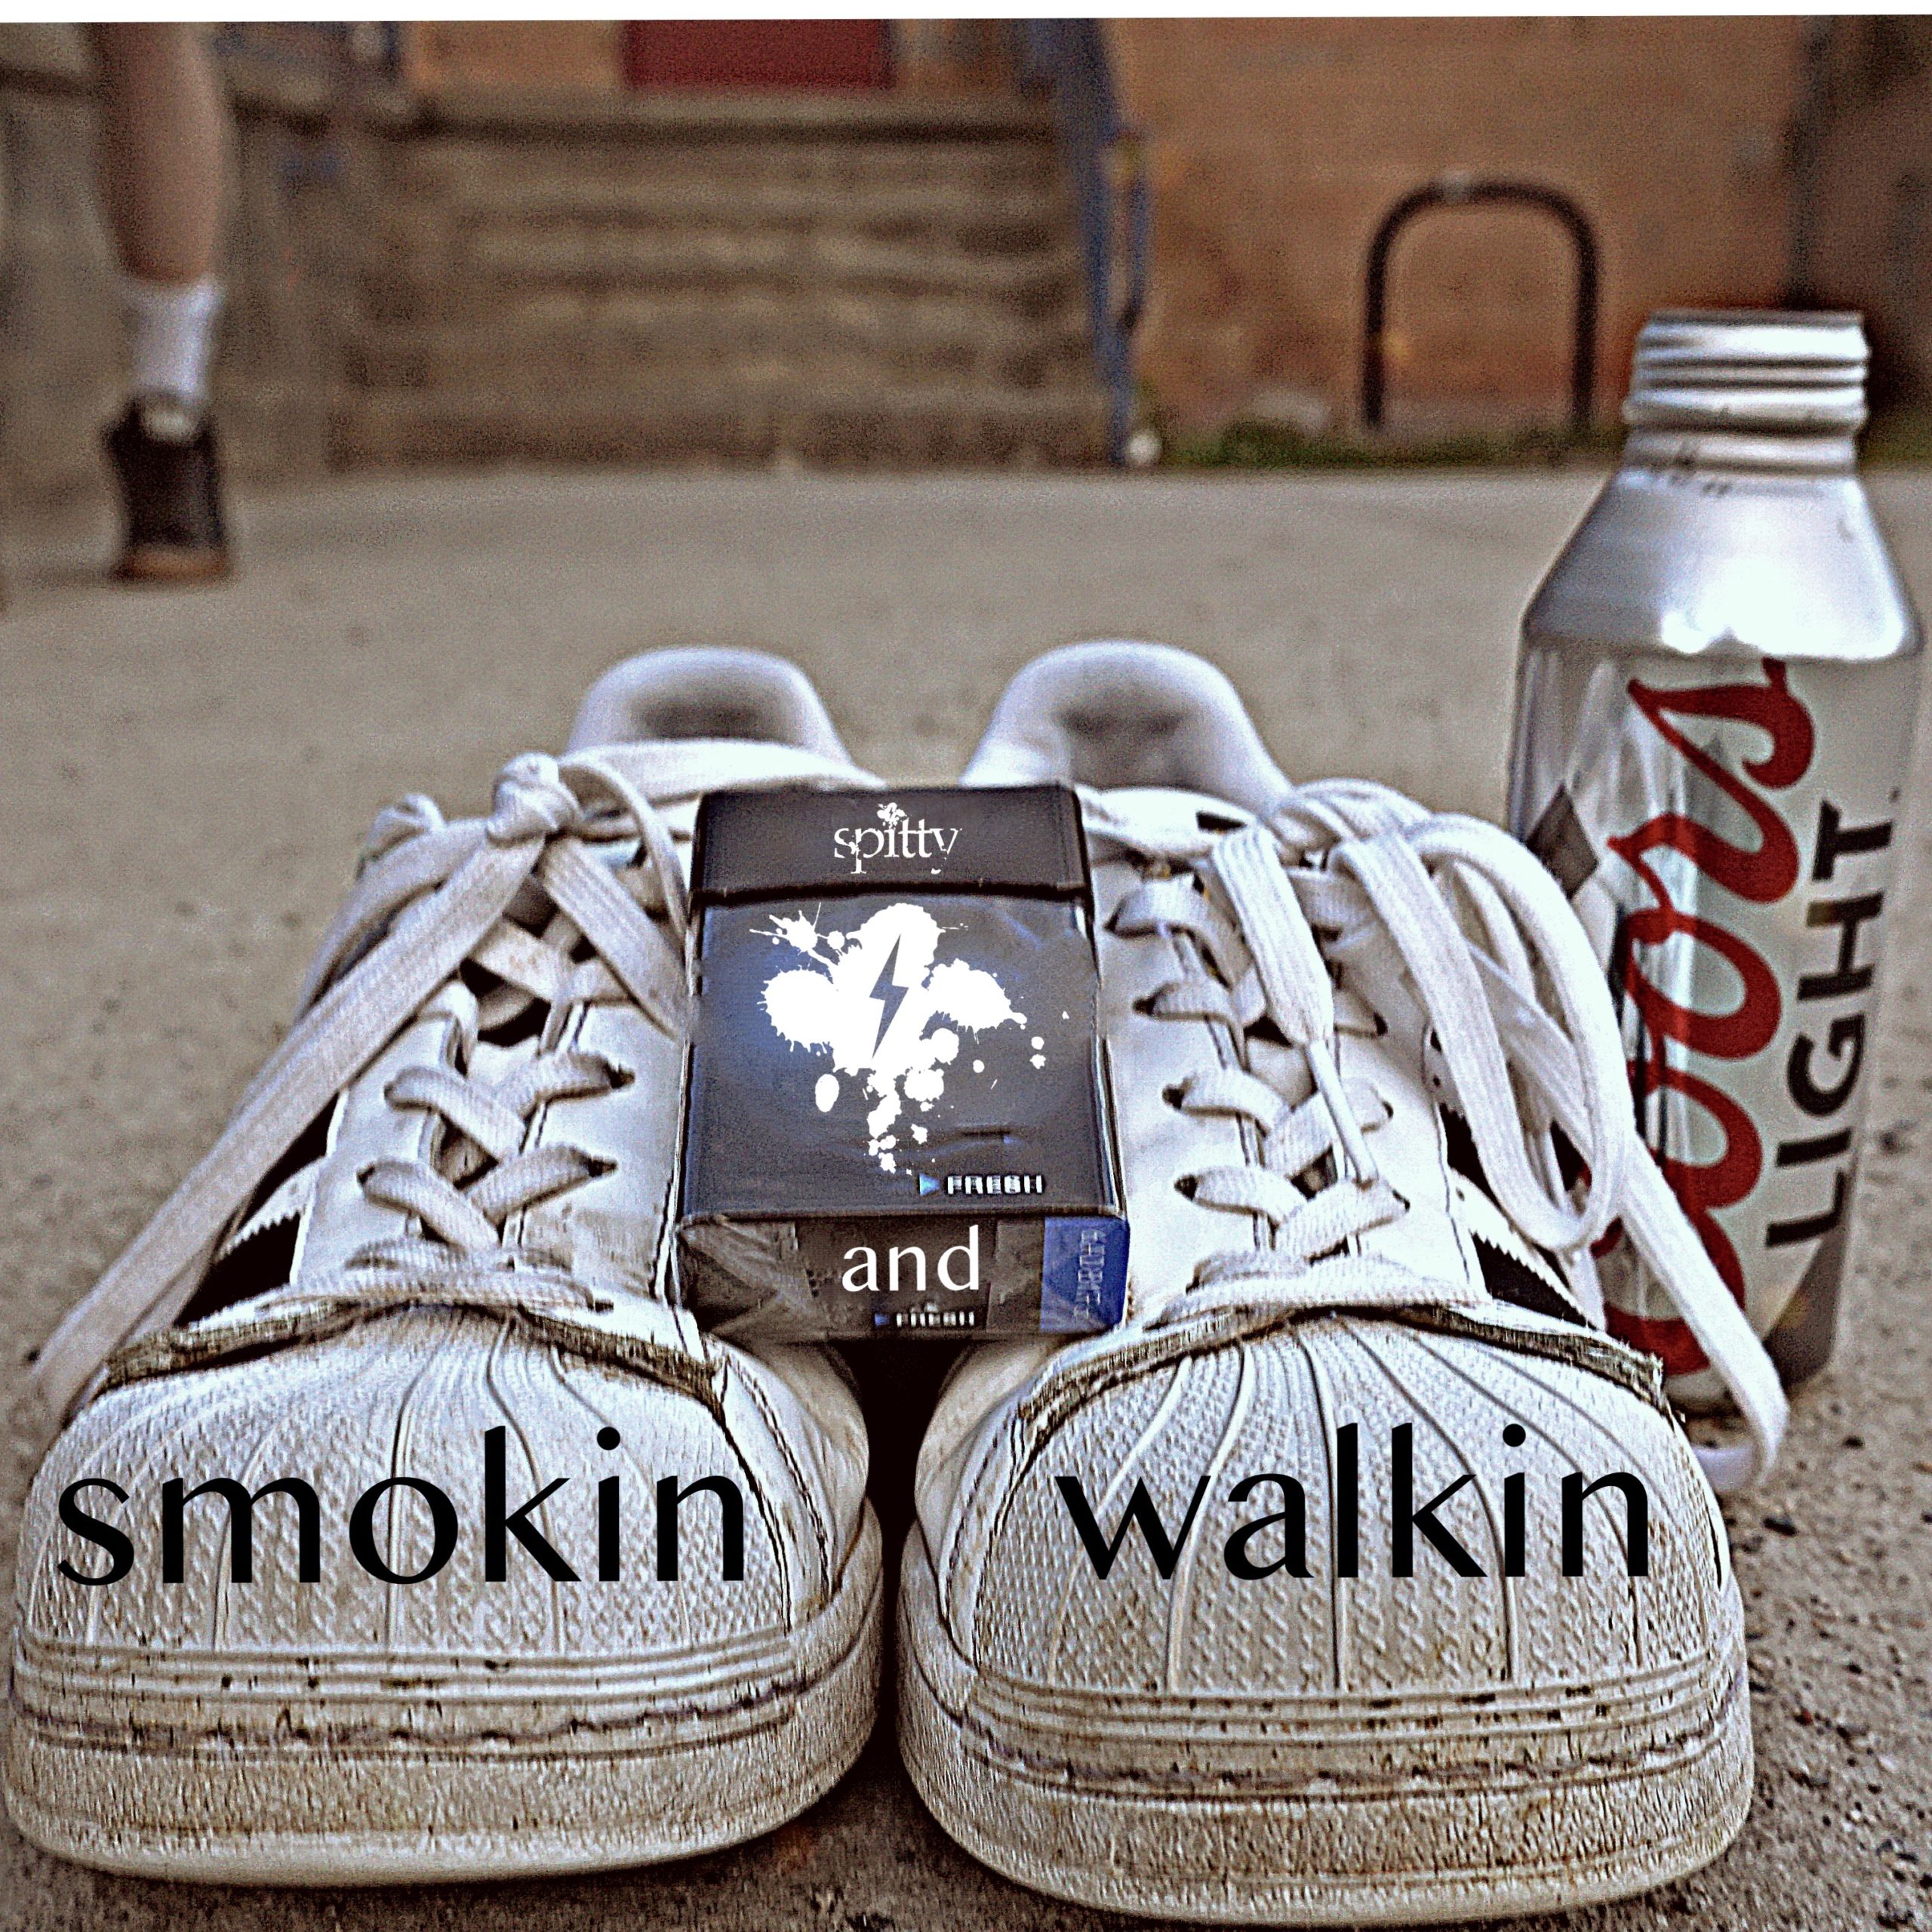 Spitty the sequel – “Smokin And Walkin”